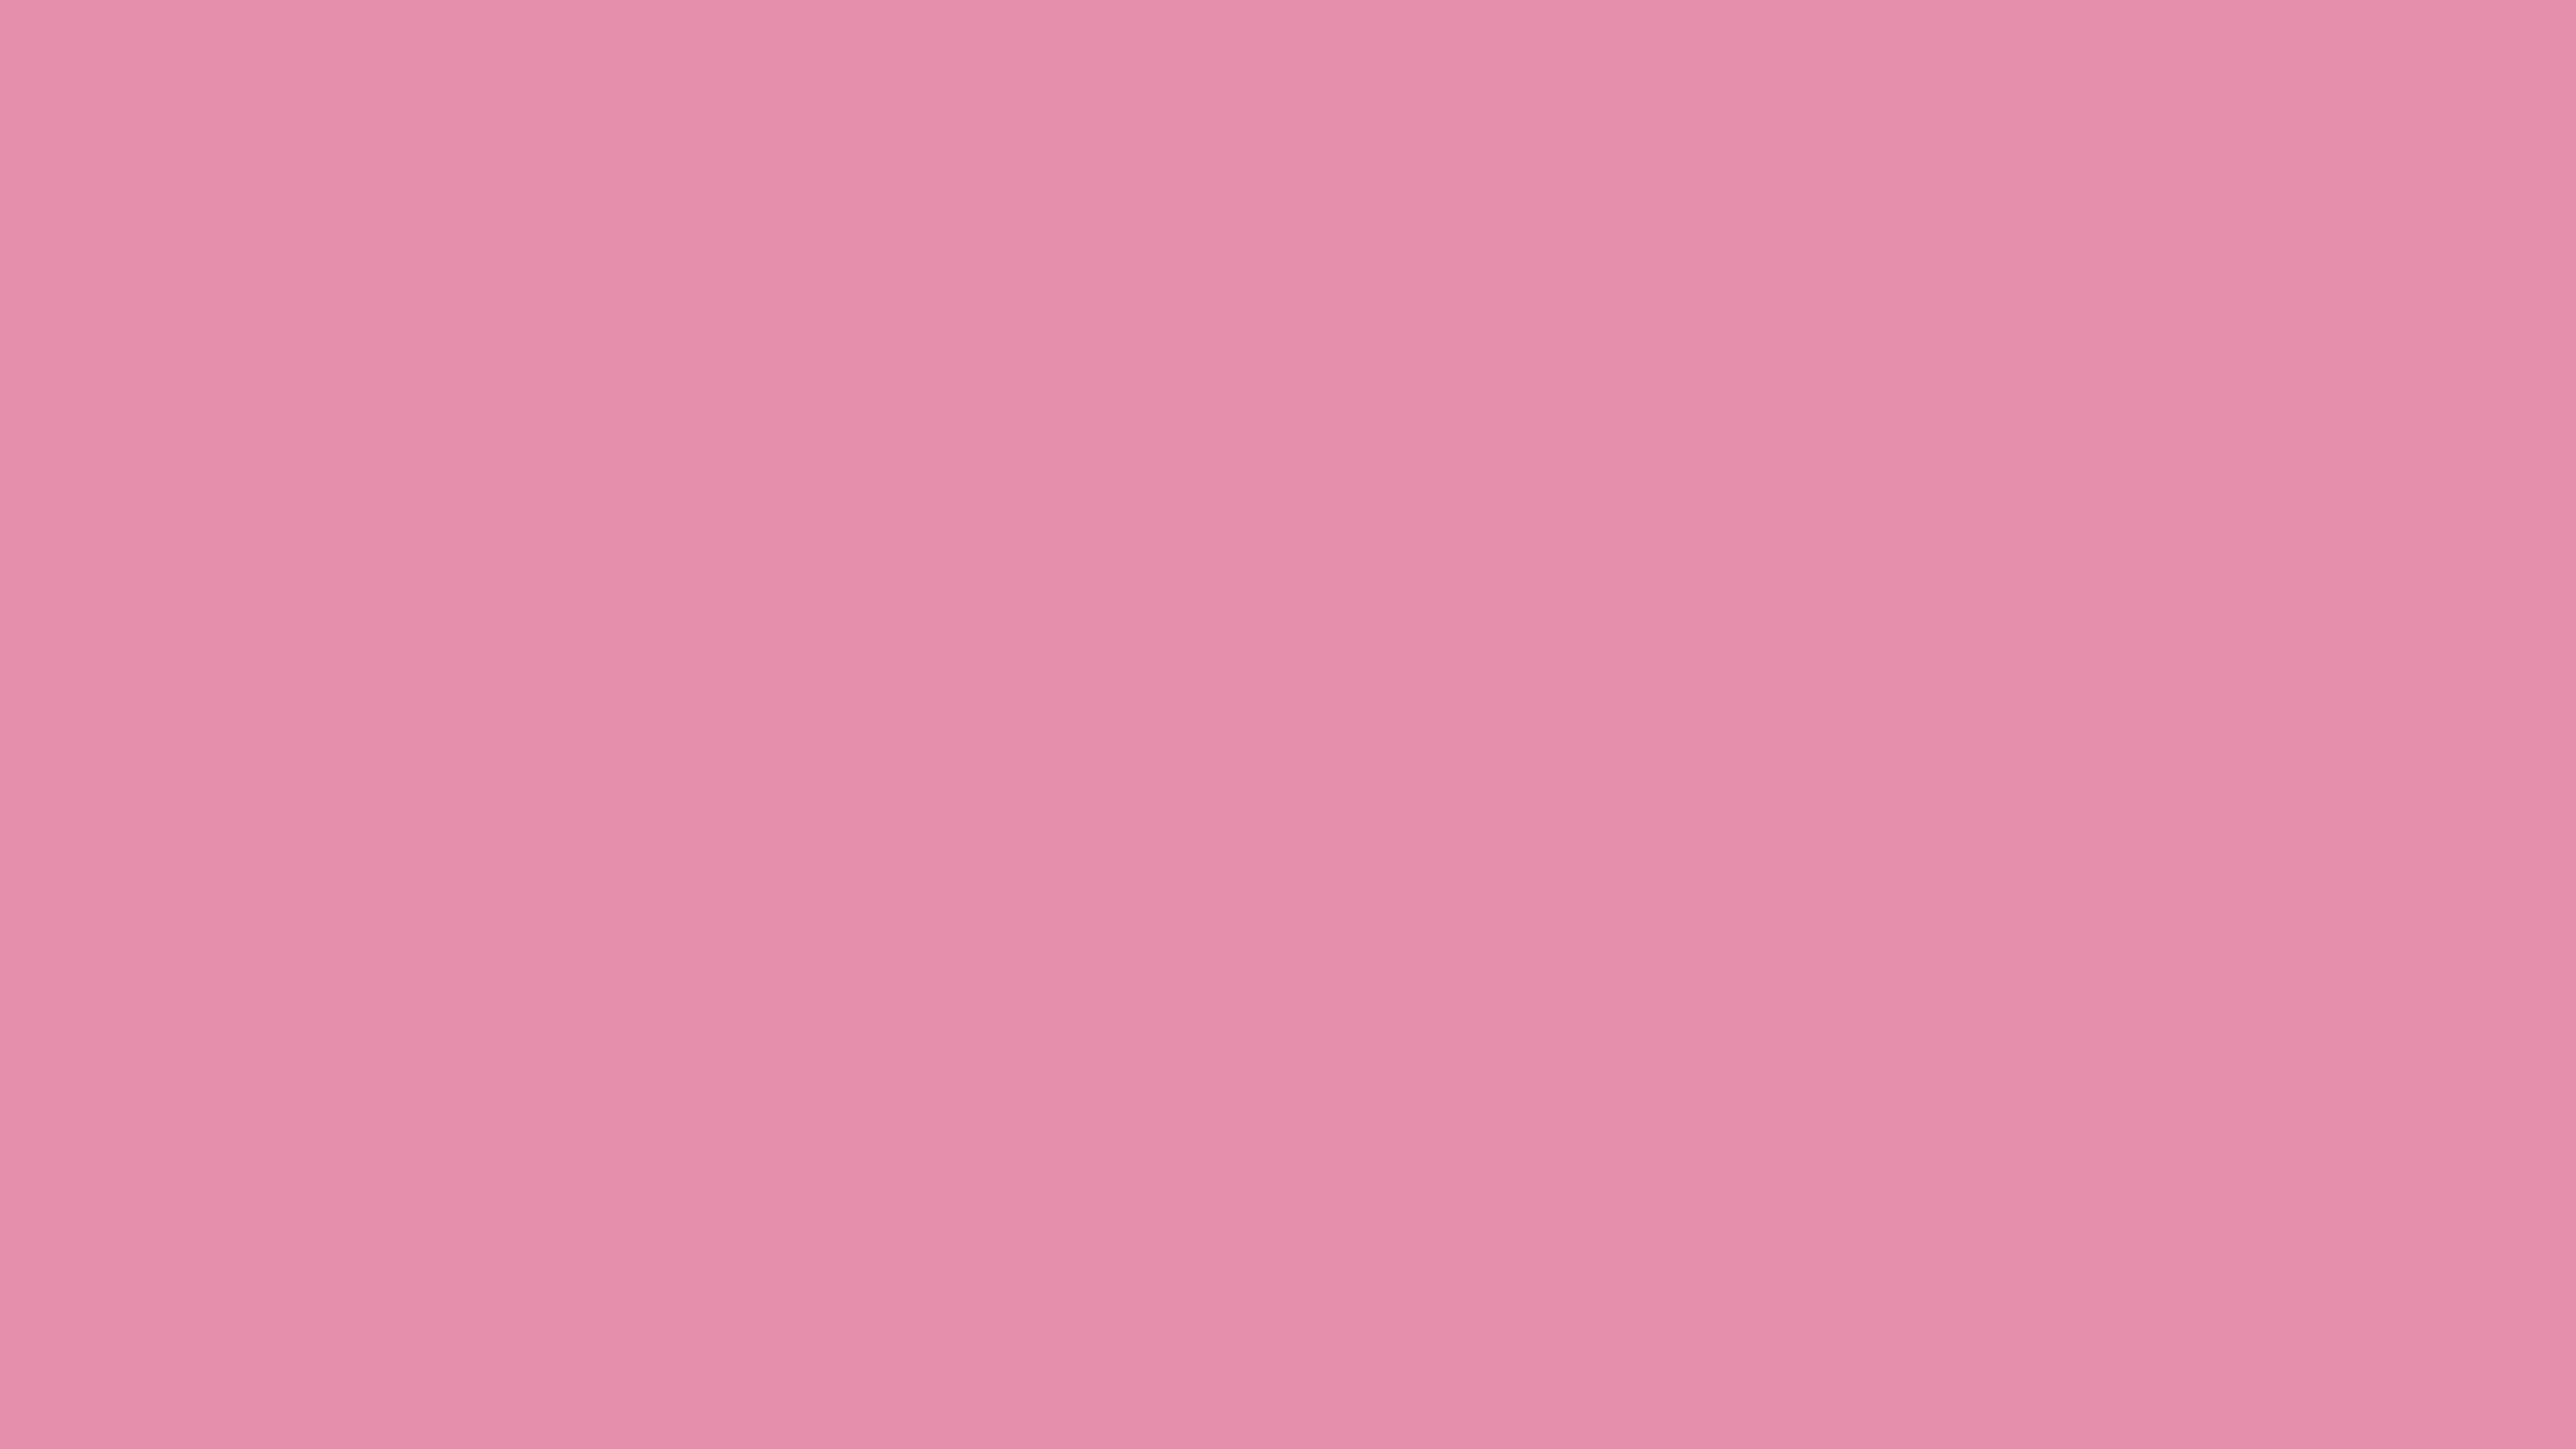 7680x4320 Charm Pink Solid Color Background